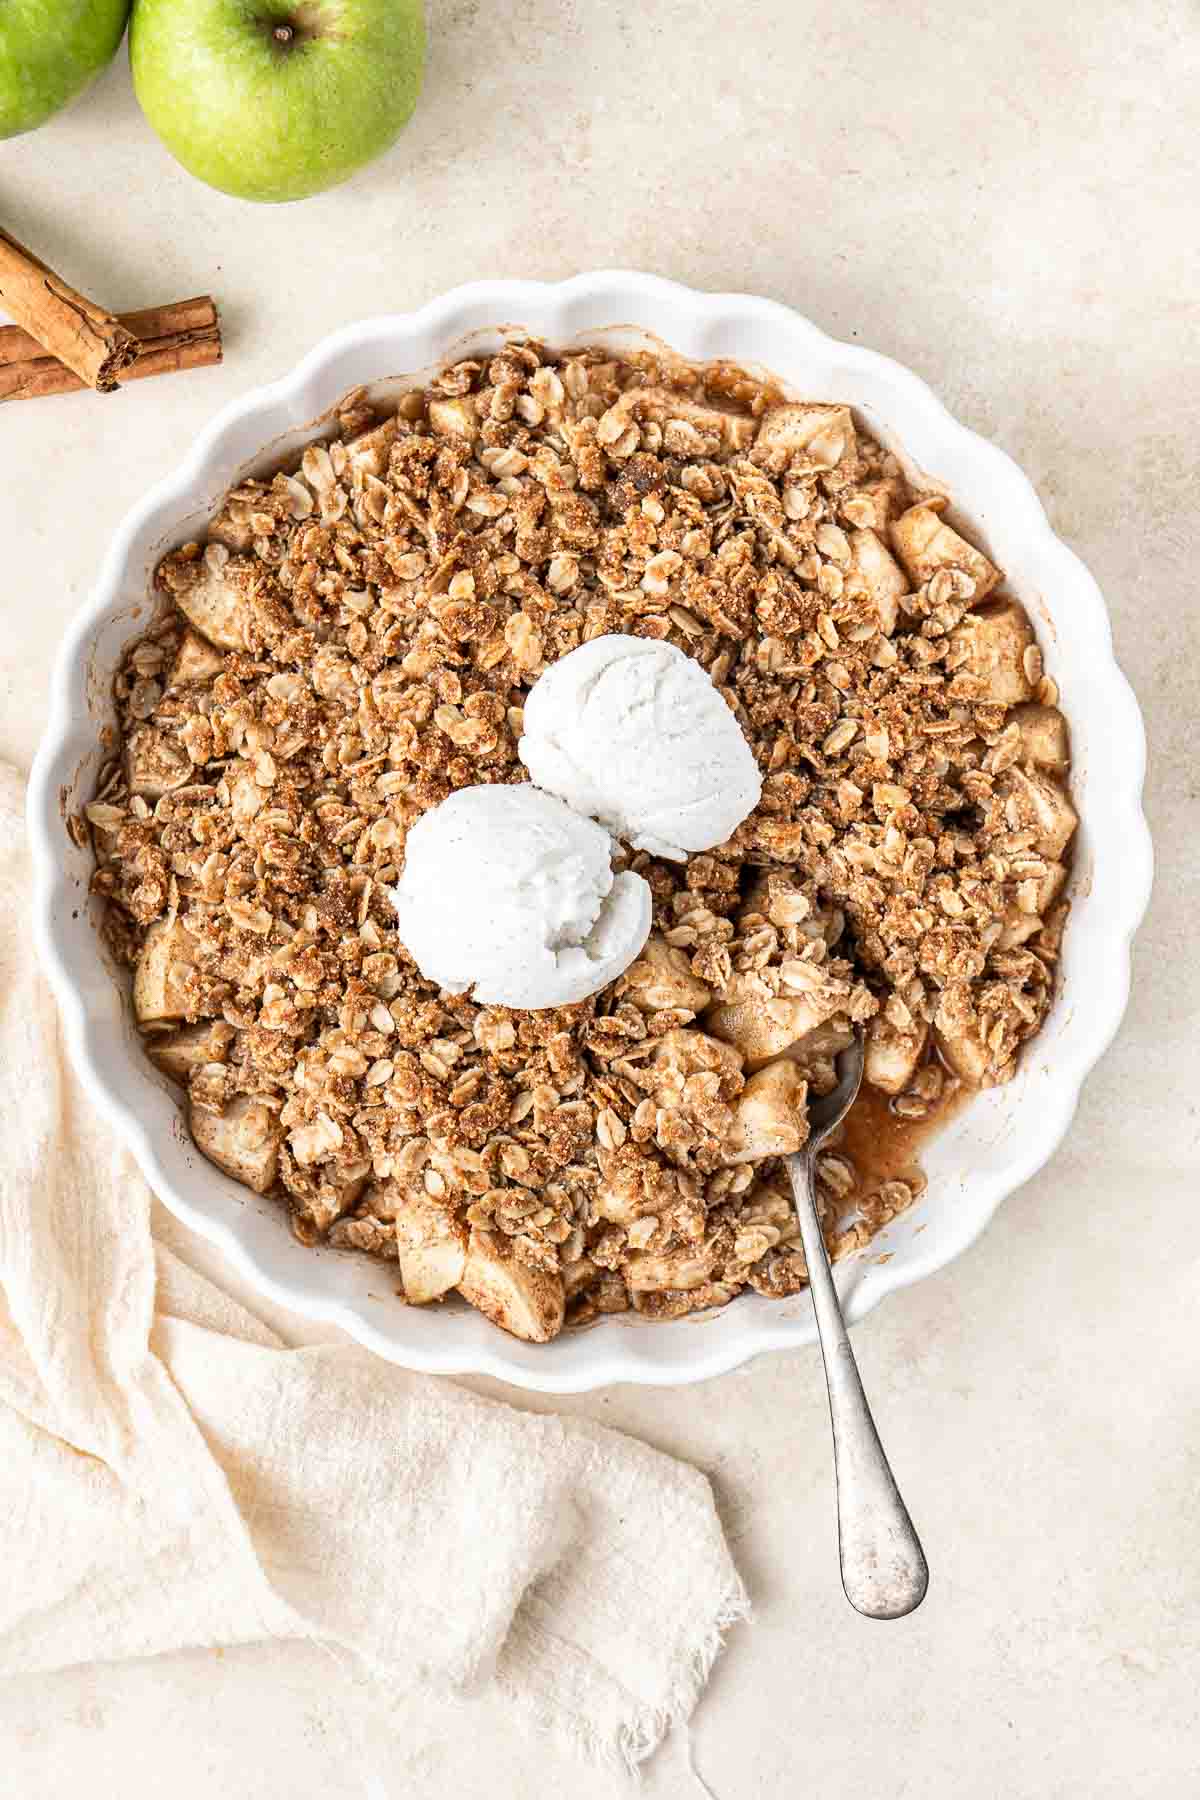 Freshly baked vegan apple crumble with vanilla ice cream and a spoon.